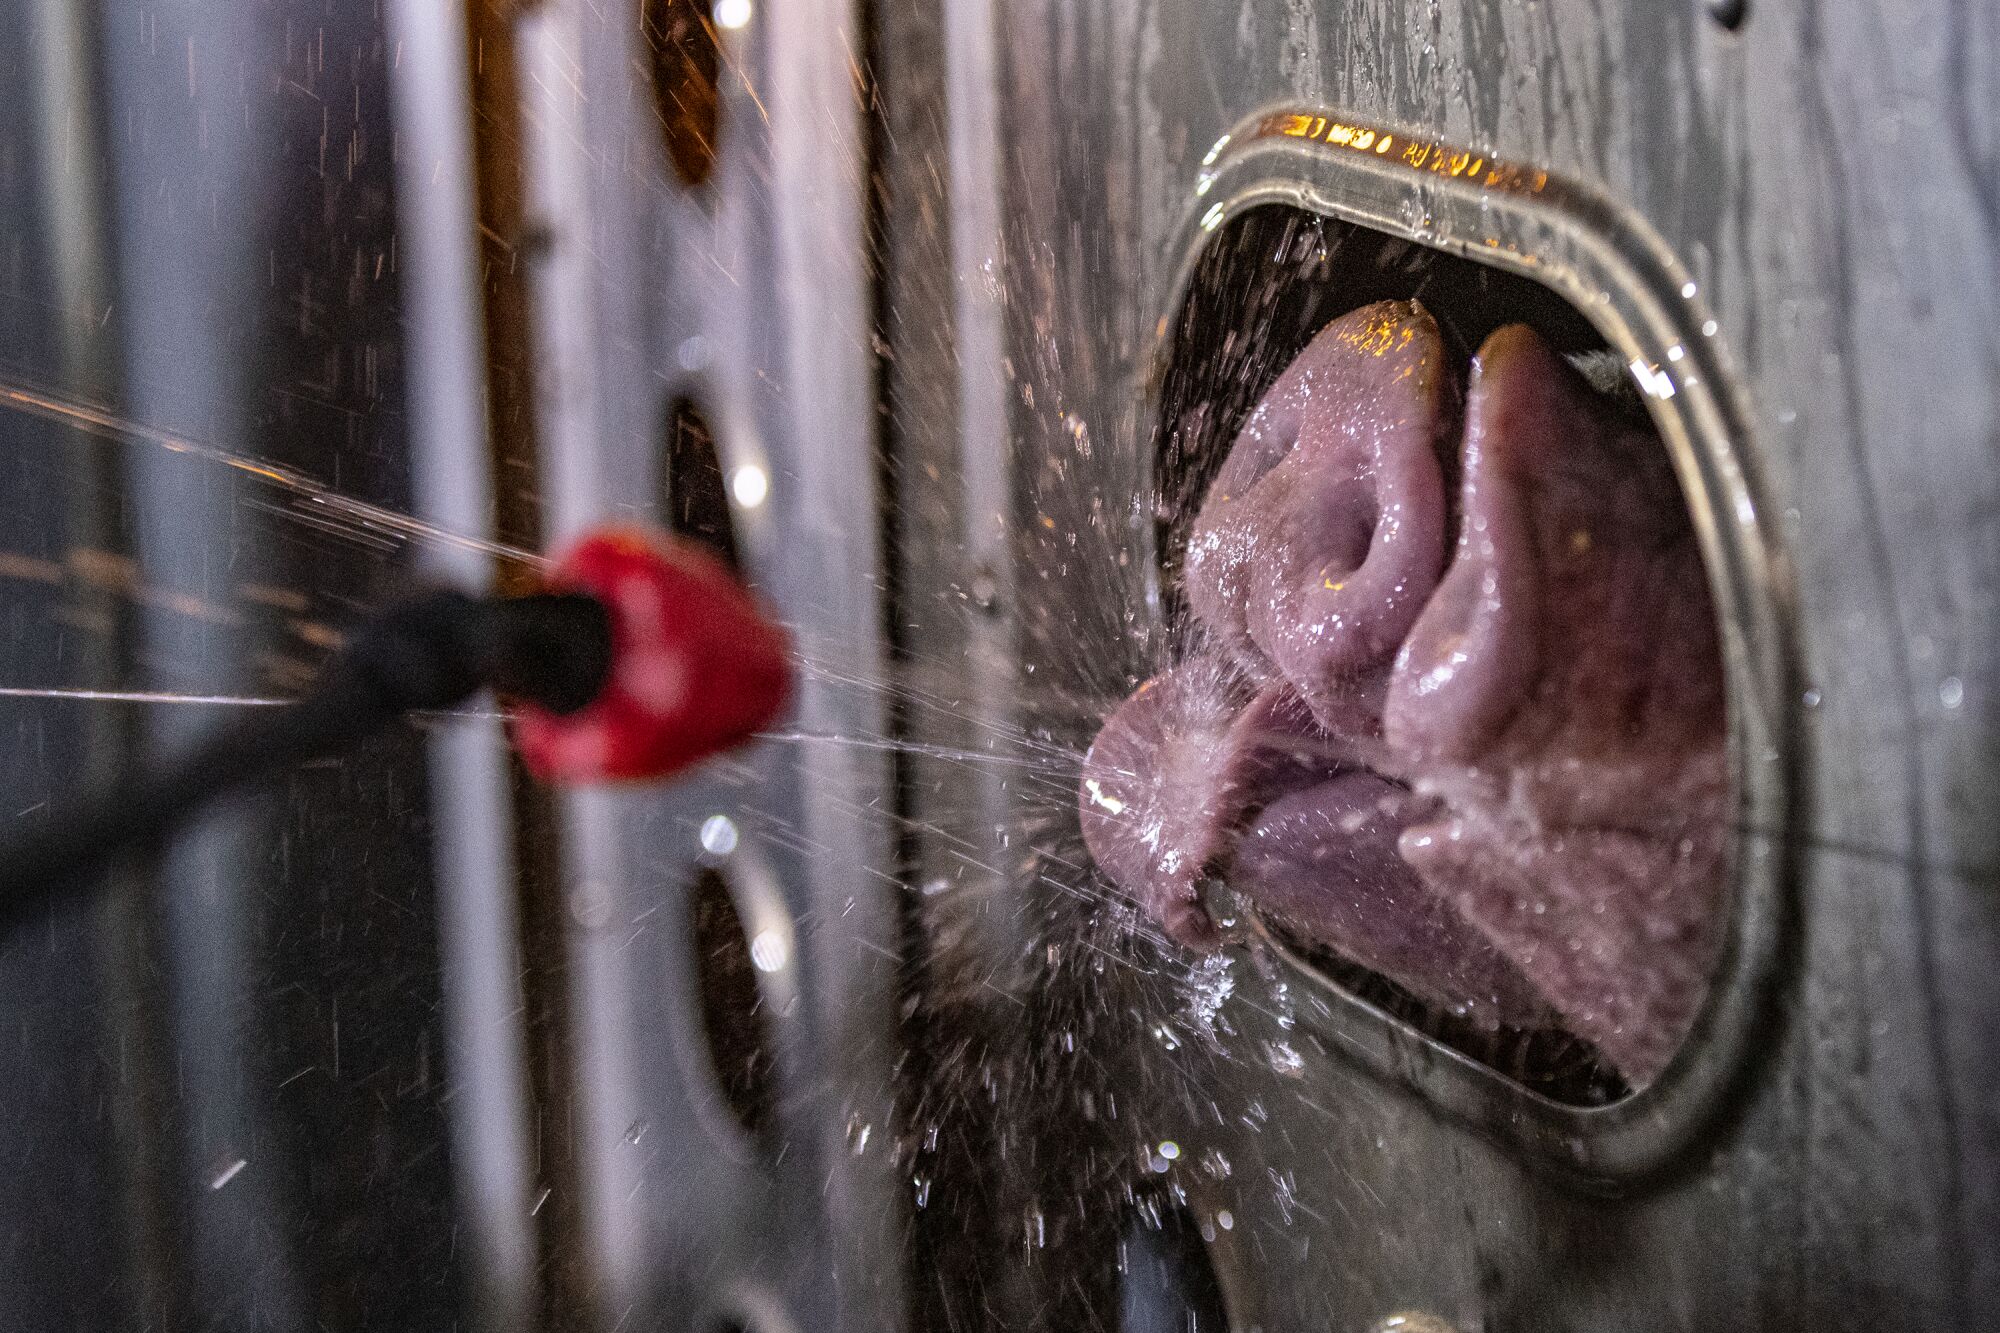 A pig laps up water through an opening of the cage.